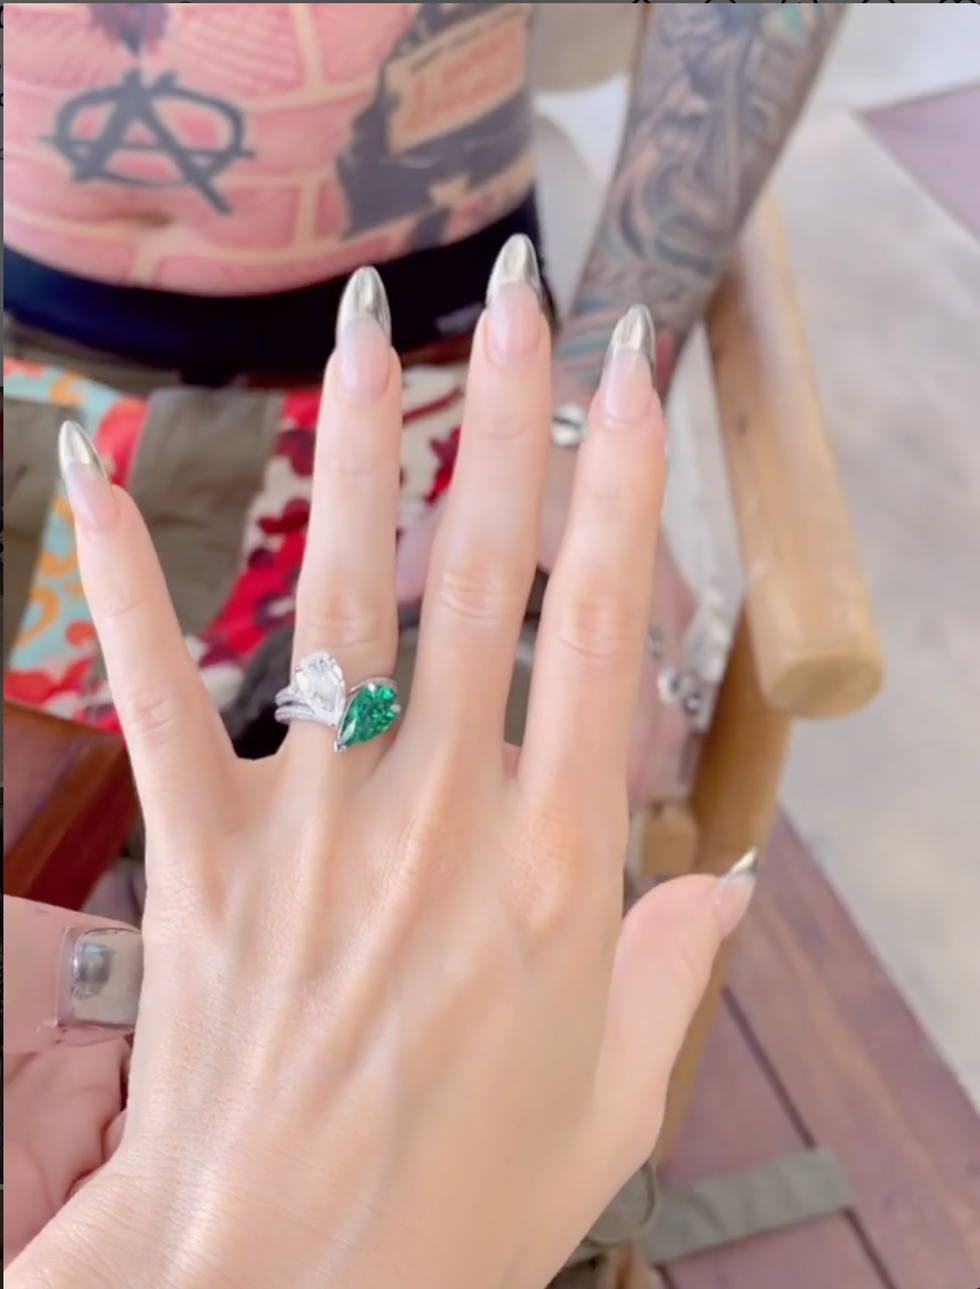 Everything You Need To Know Now That Machine Gun Kelly And Megan Fox Are Officially Engaged